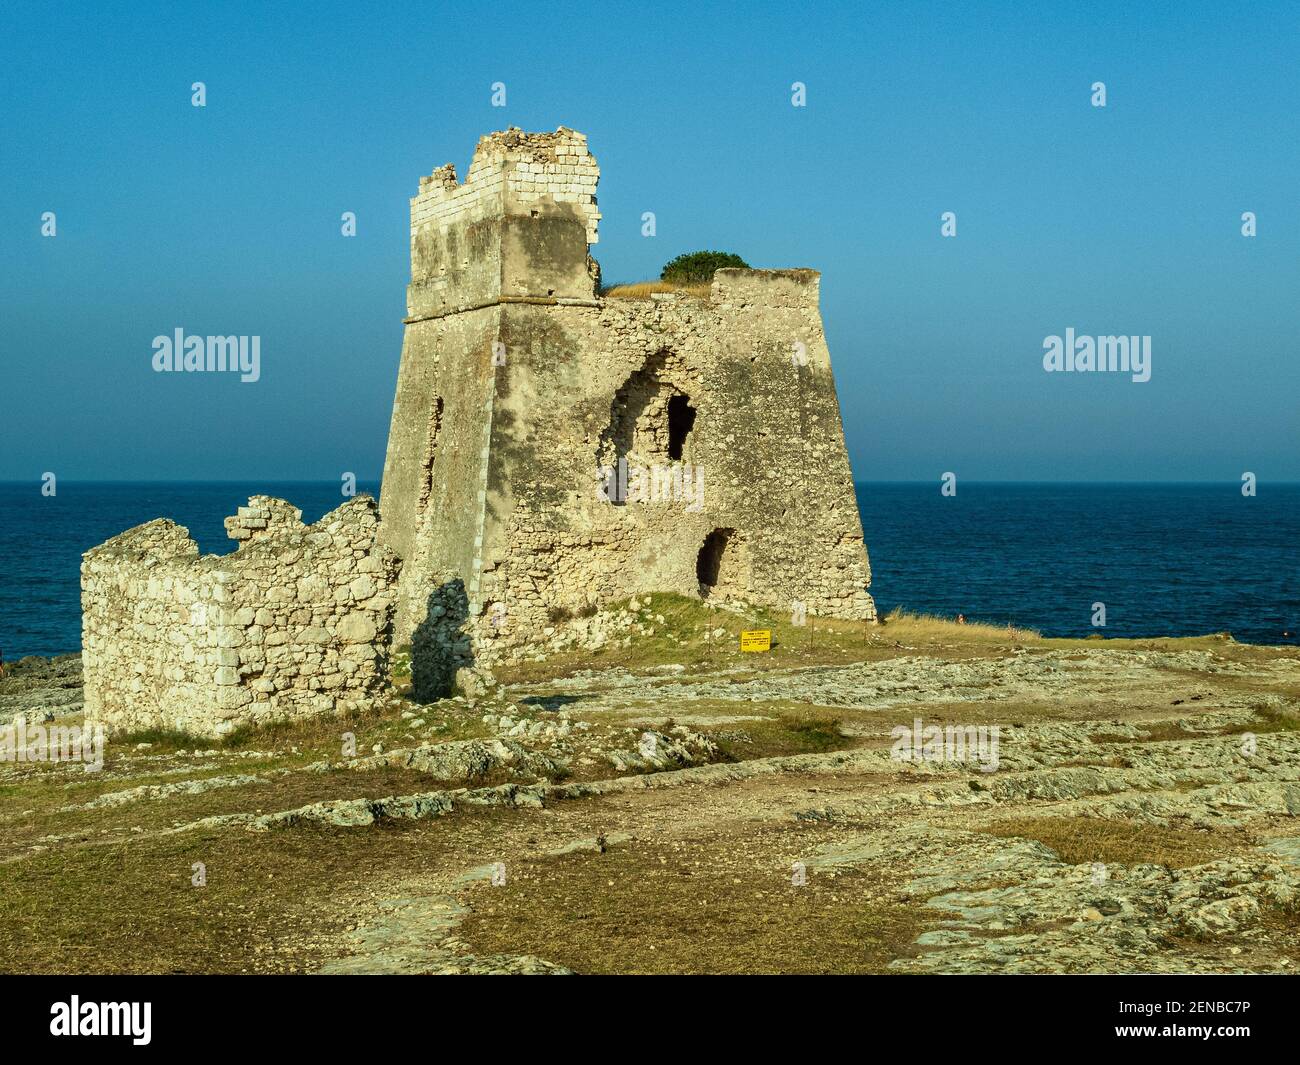 Ruins of one of the watchtowers on the sea in the Gargano. Peschici, Foggia province, Puglia, Italy, Europe Stock Photo